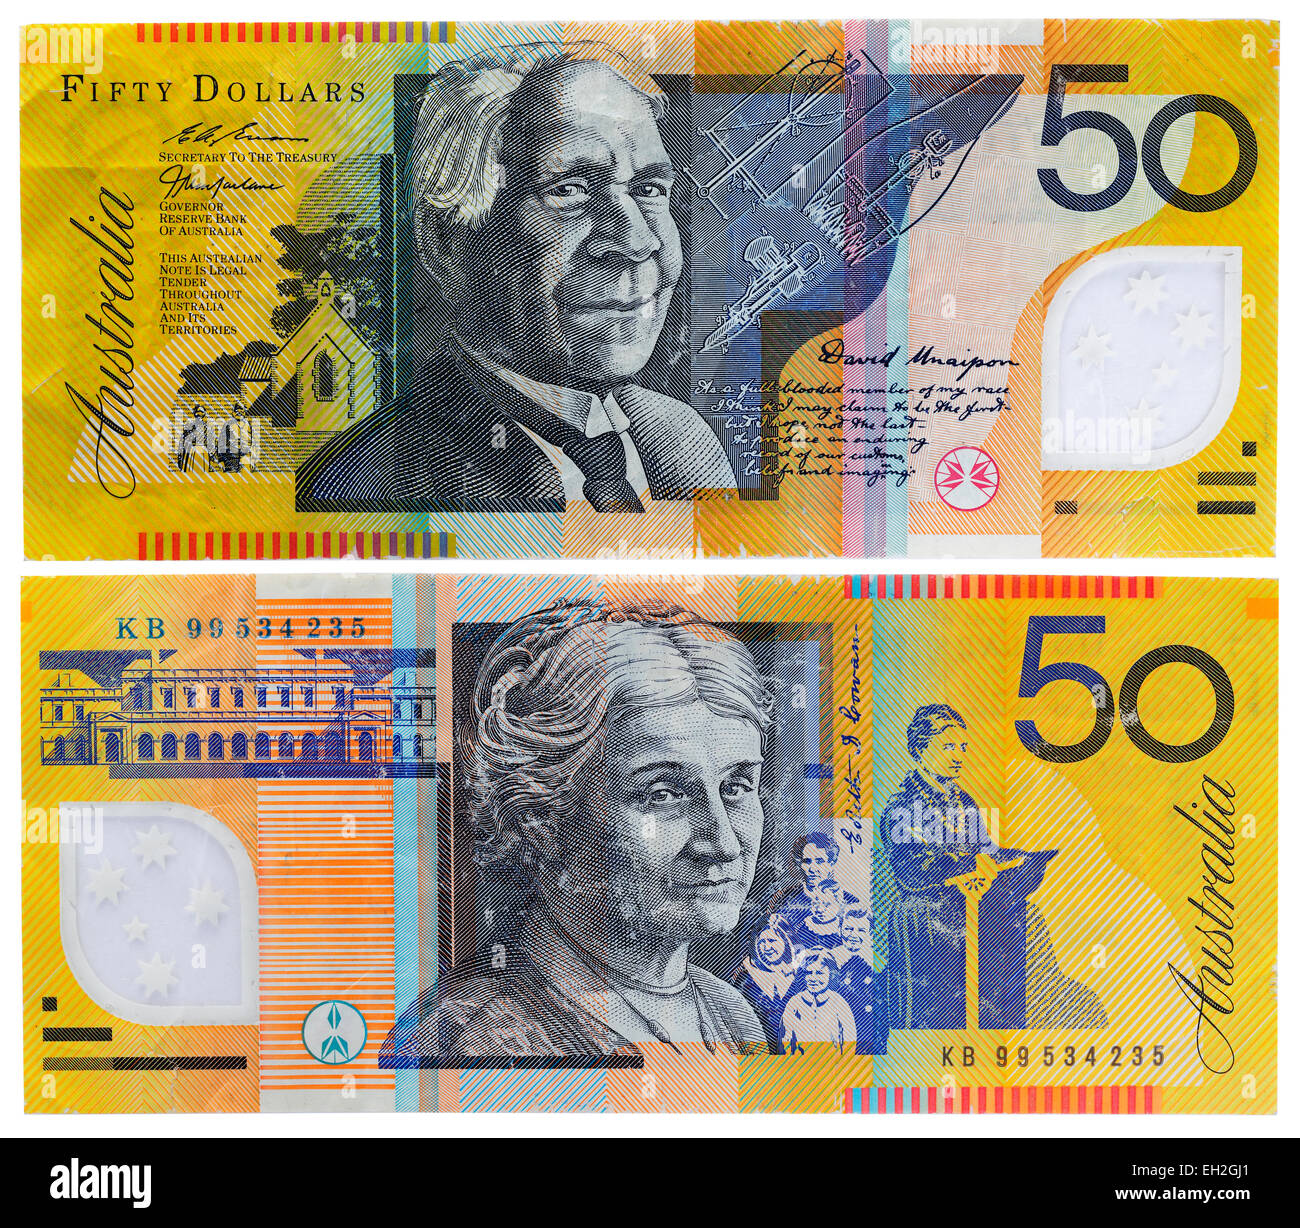 Australian Money 50 High Resolution Stock Photography and Images - Alamy